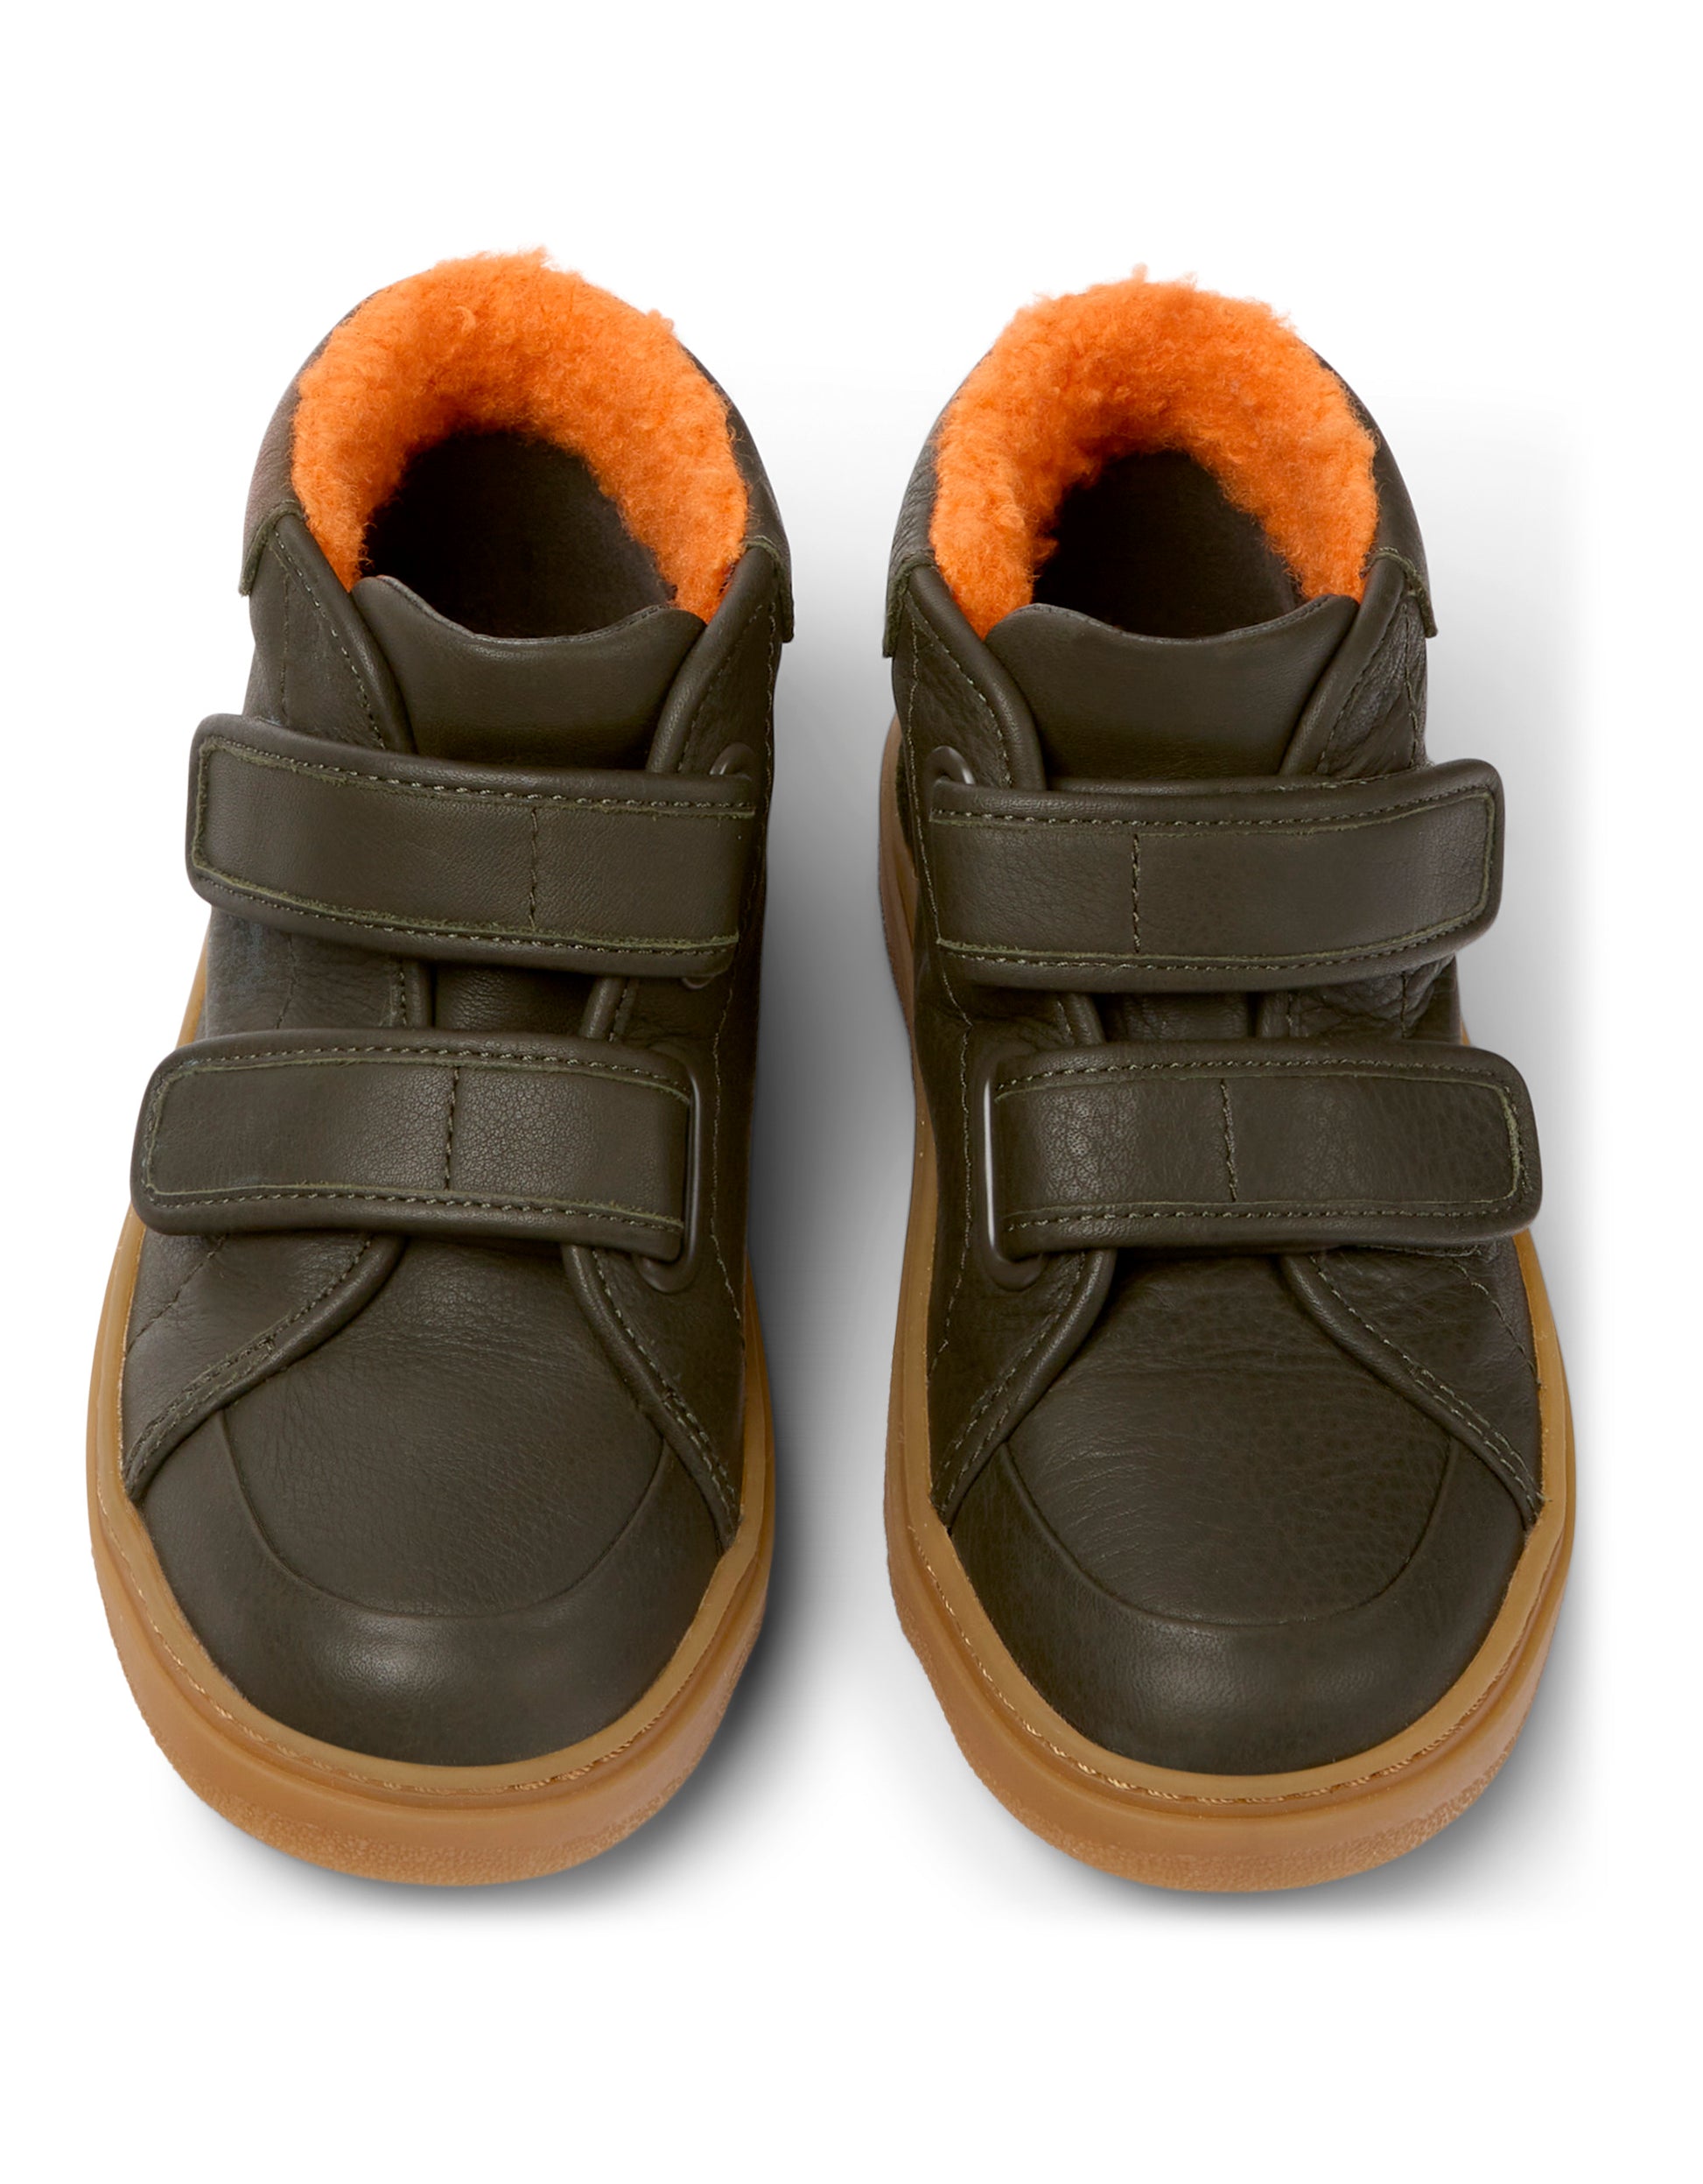 A pair of boys casual ankle boots by Camper, style K900303-004 in brown leather with orange fur ankle and double velcro fastening. 